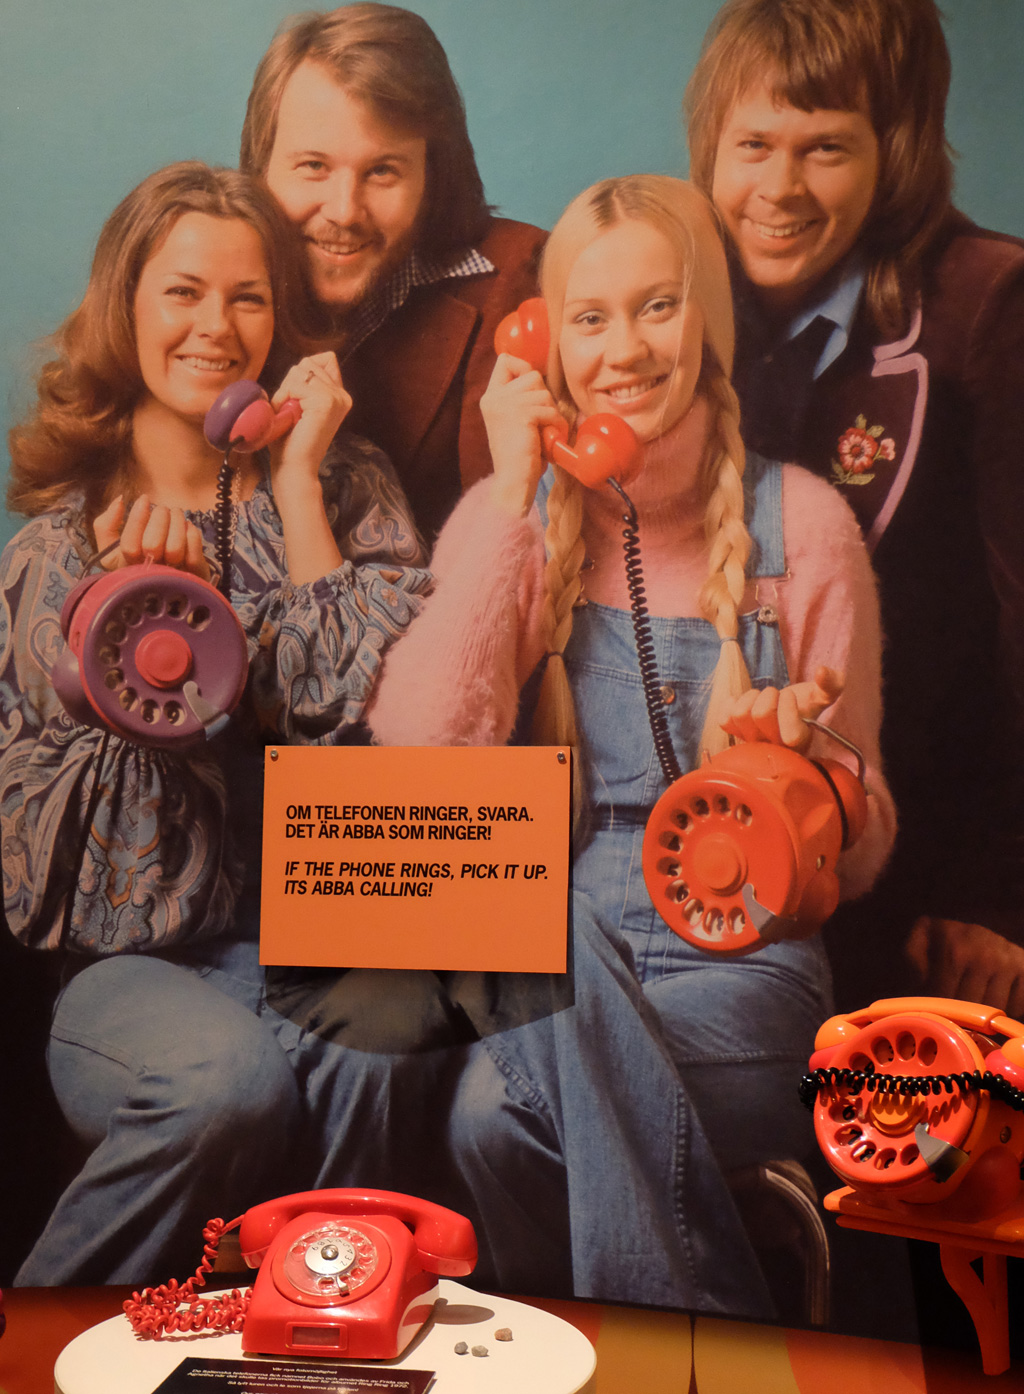 If the phone rings, pick it up. It's ABBA calling!